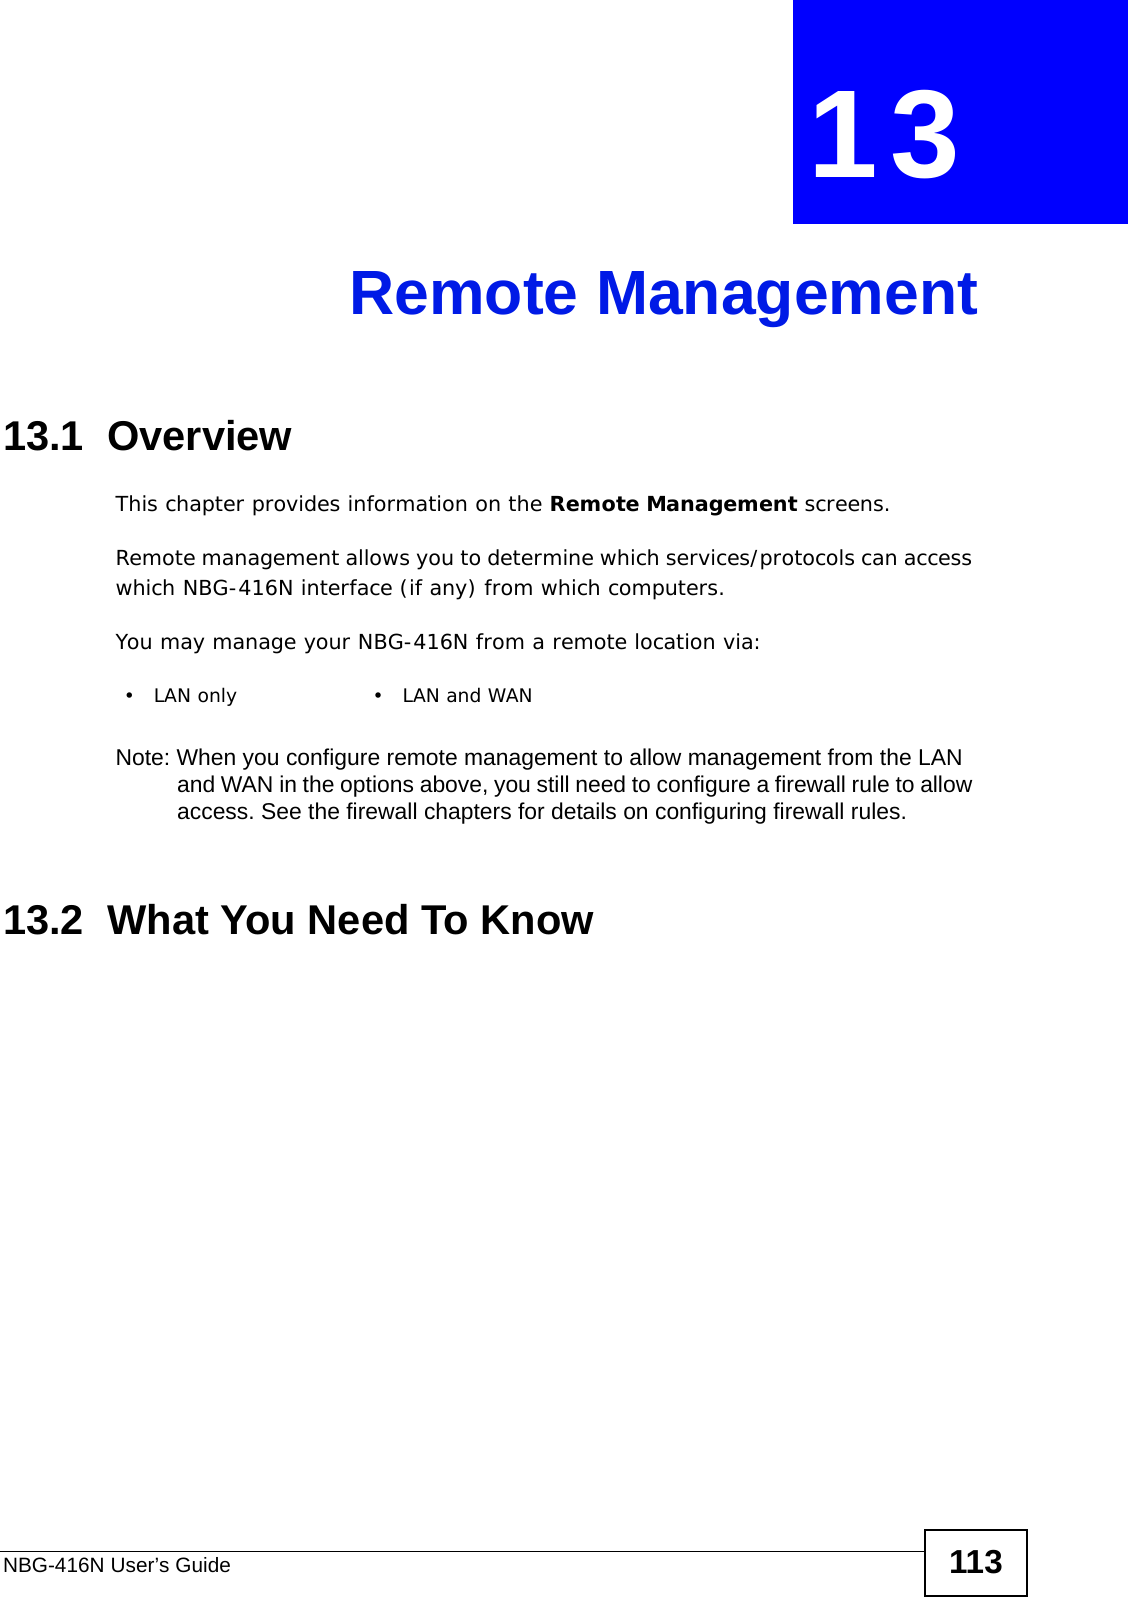 NBG-416N User’s Guide 113CHAPTER  13 Remote Management13.1  OverviewThis chapter provides information on the Remote Management screens. Remote management allows you to determine which services/protocols can access which NBG-416N interface (if any) from which computers.You may manage your NBG-416N from a remote location via:Note: When you configure remote management to allow management from the LAN and WAN in the options above, you still need to configure a firewall rule to allow access. See the firewall chapters for details on configuring firewall rules.13.2  What You Need To Know•LAN only •LAN and WAN